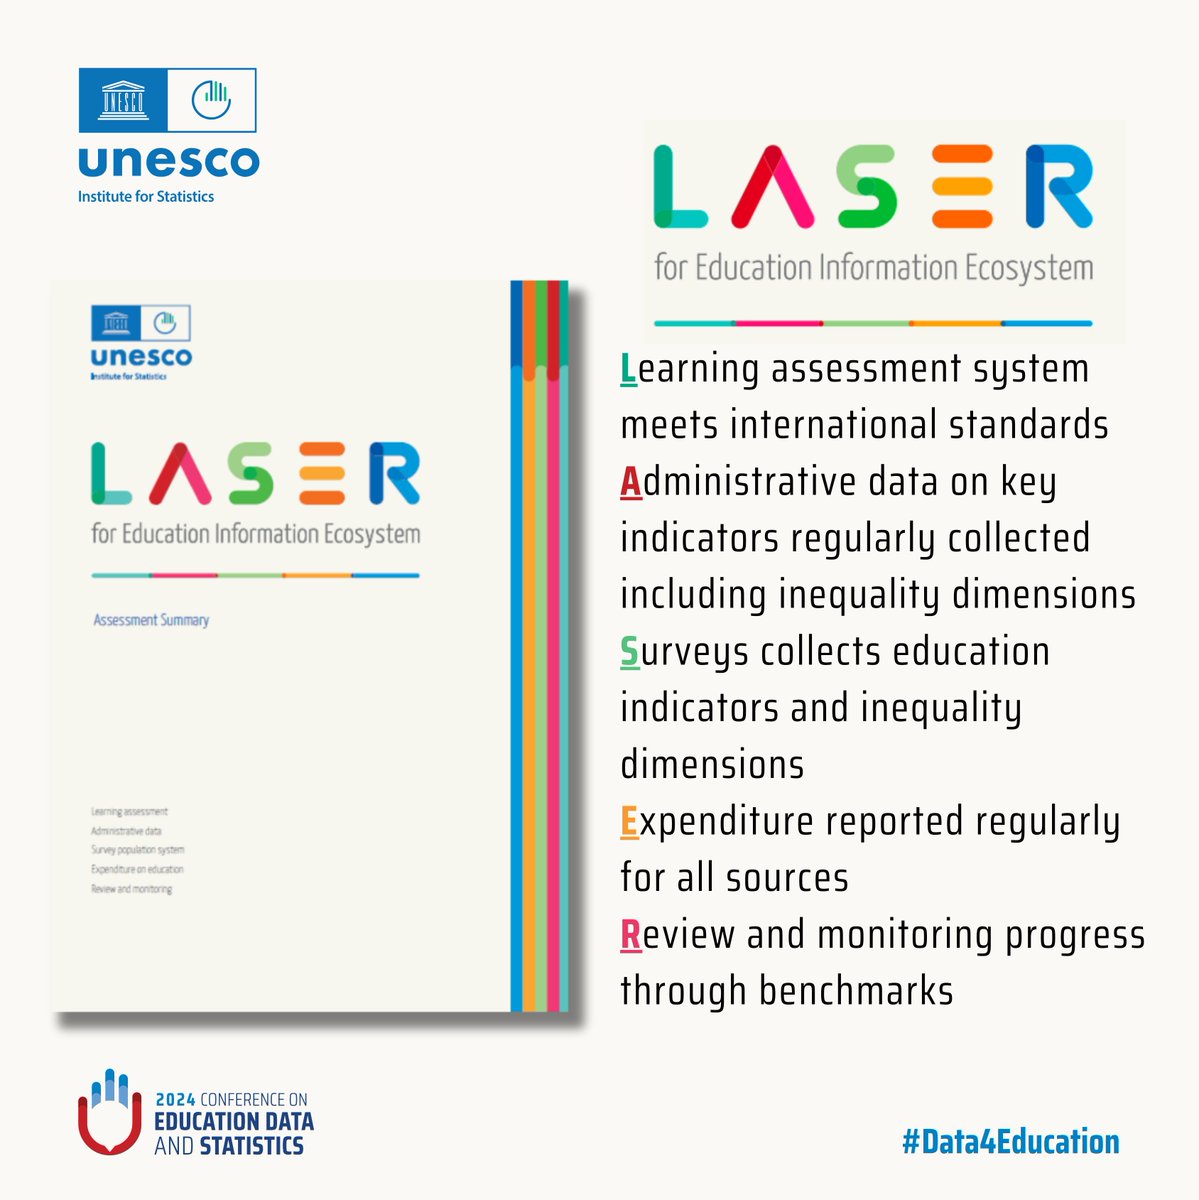 📢UIS released LASER for Education Information Ecosystem during the Conference on Education Data and Statistics. LASER assesses whether a country’s #educationdata ecosystem collects and leverages the variety of data sources required for #policymaking. 

tcg.uis.unesco.org/laser